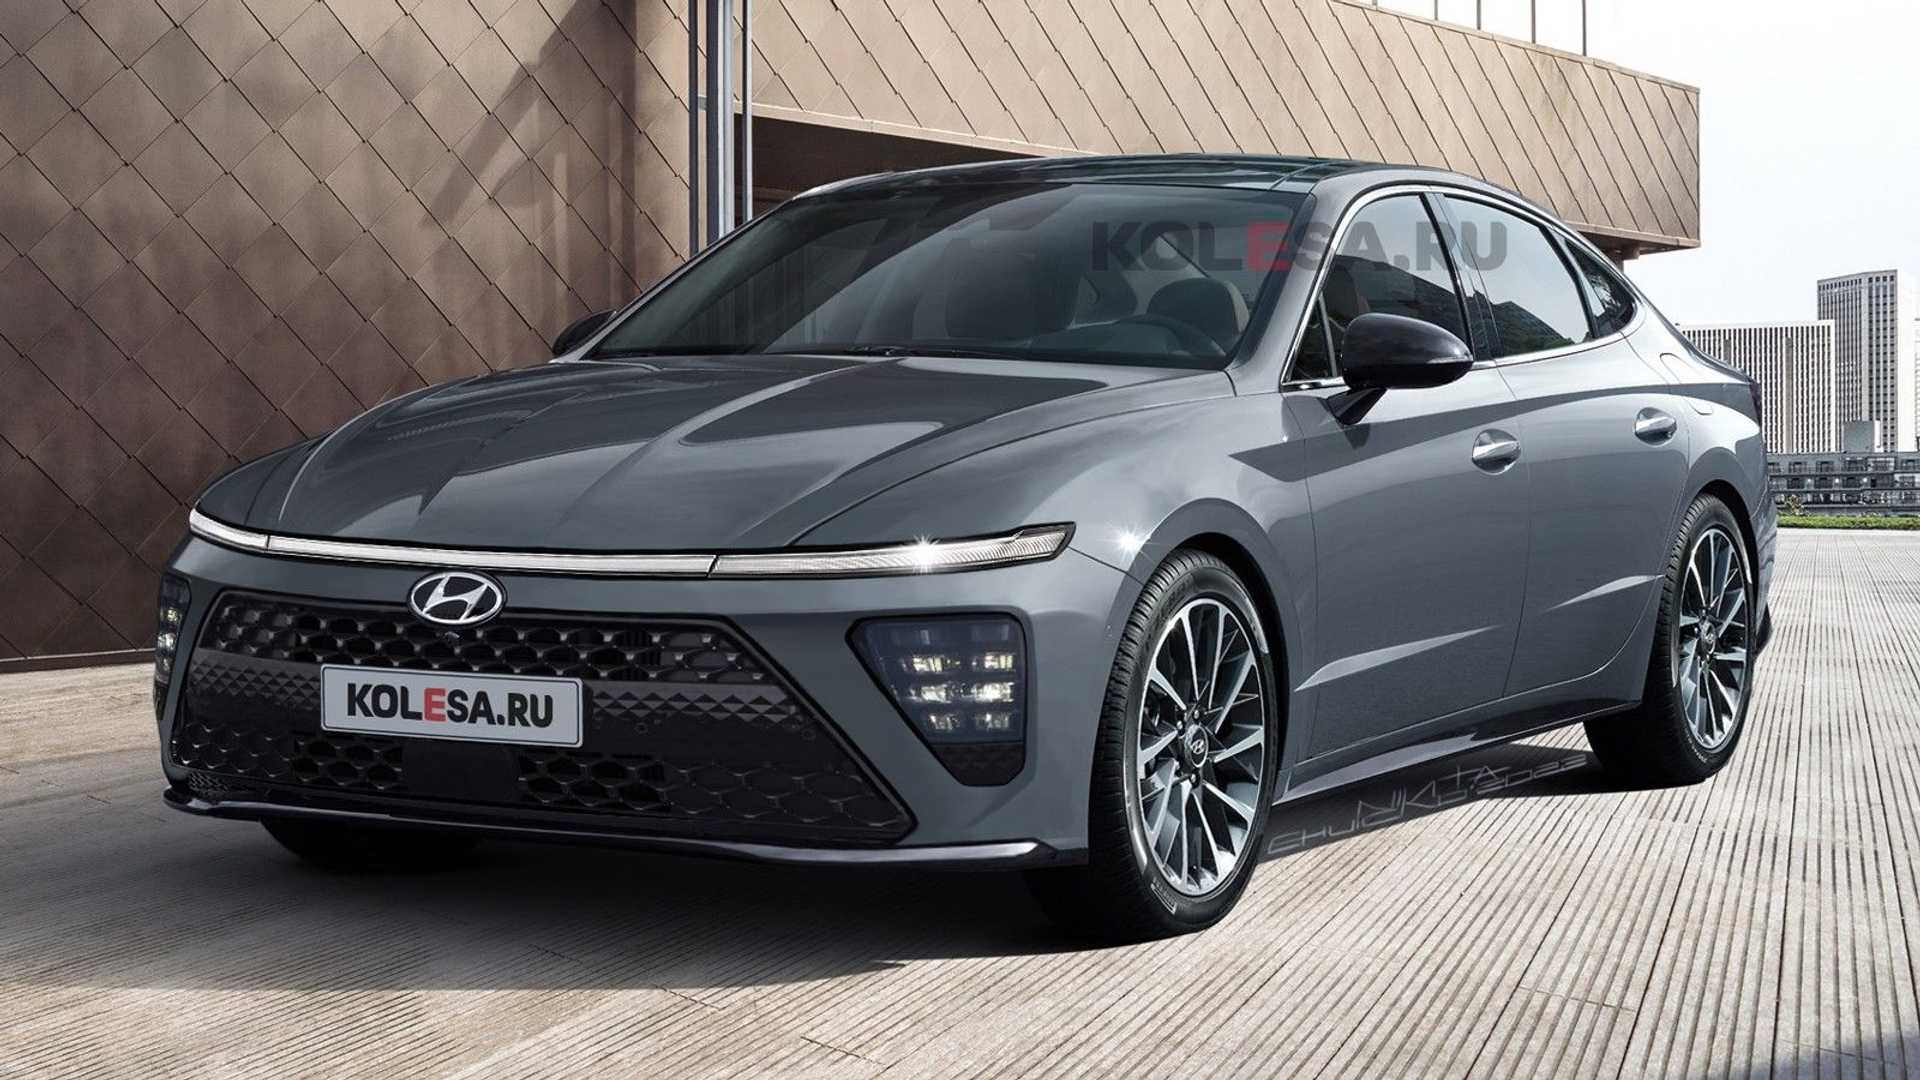 This is what the 2023 Hyundai Sonata could look like based on renderings with Staria-inspired face